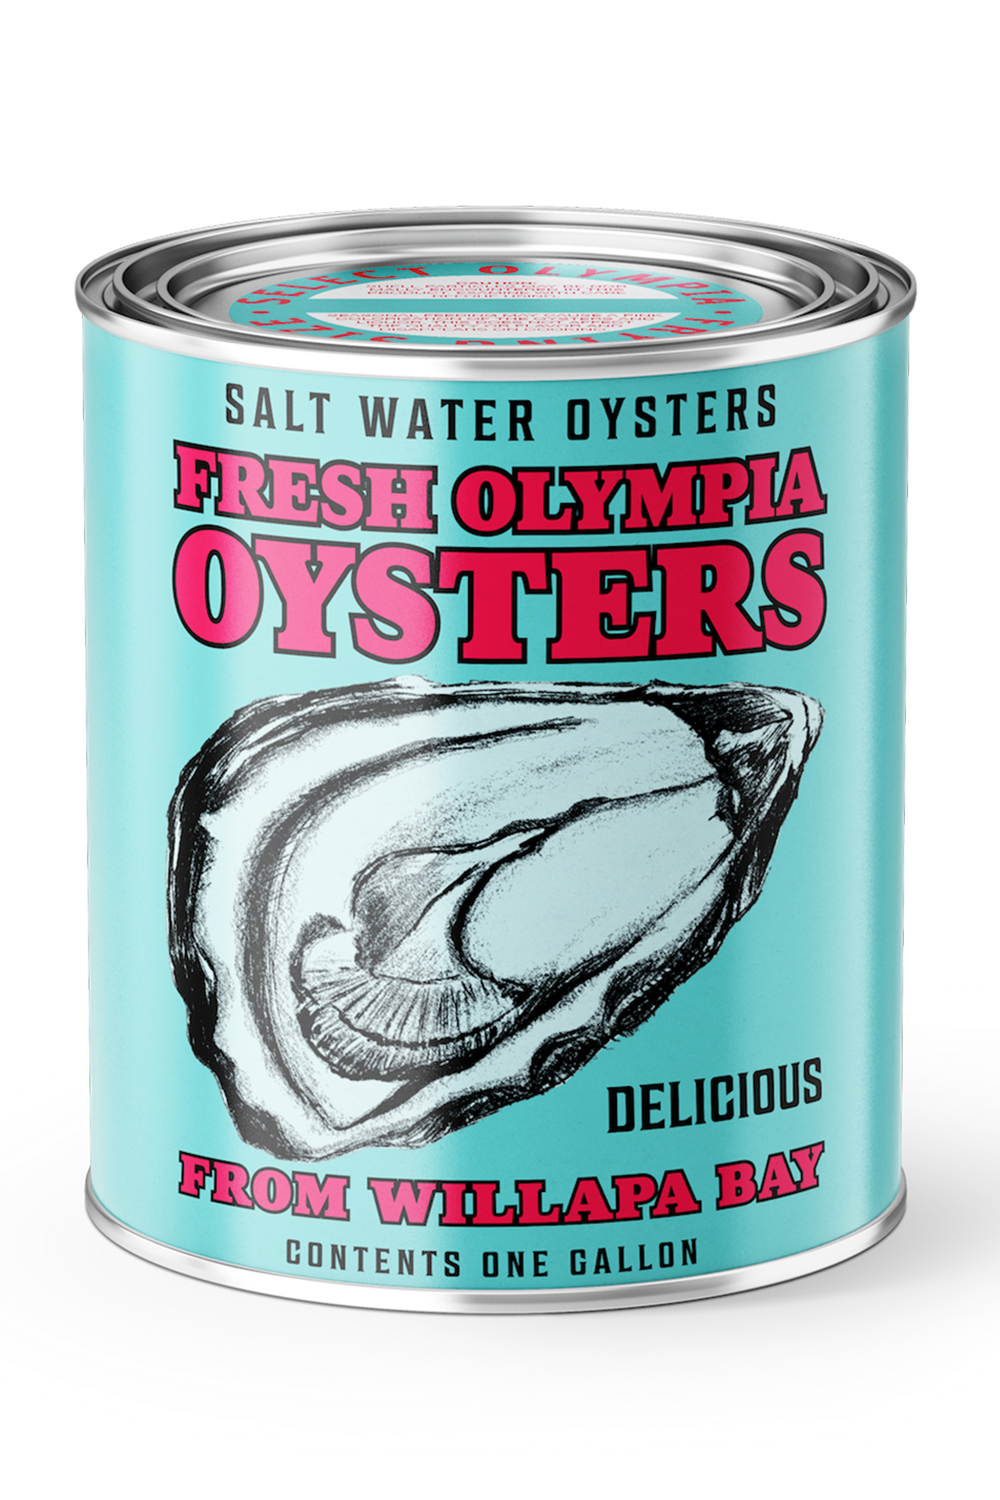 SIDEWALK SALE ITEM - Vintage Oyster Can Candle - Willapa Bay